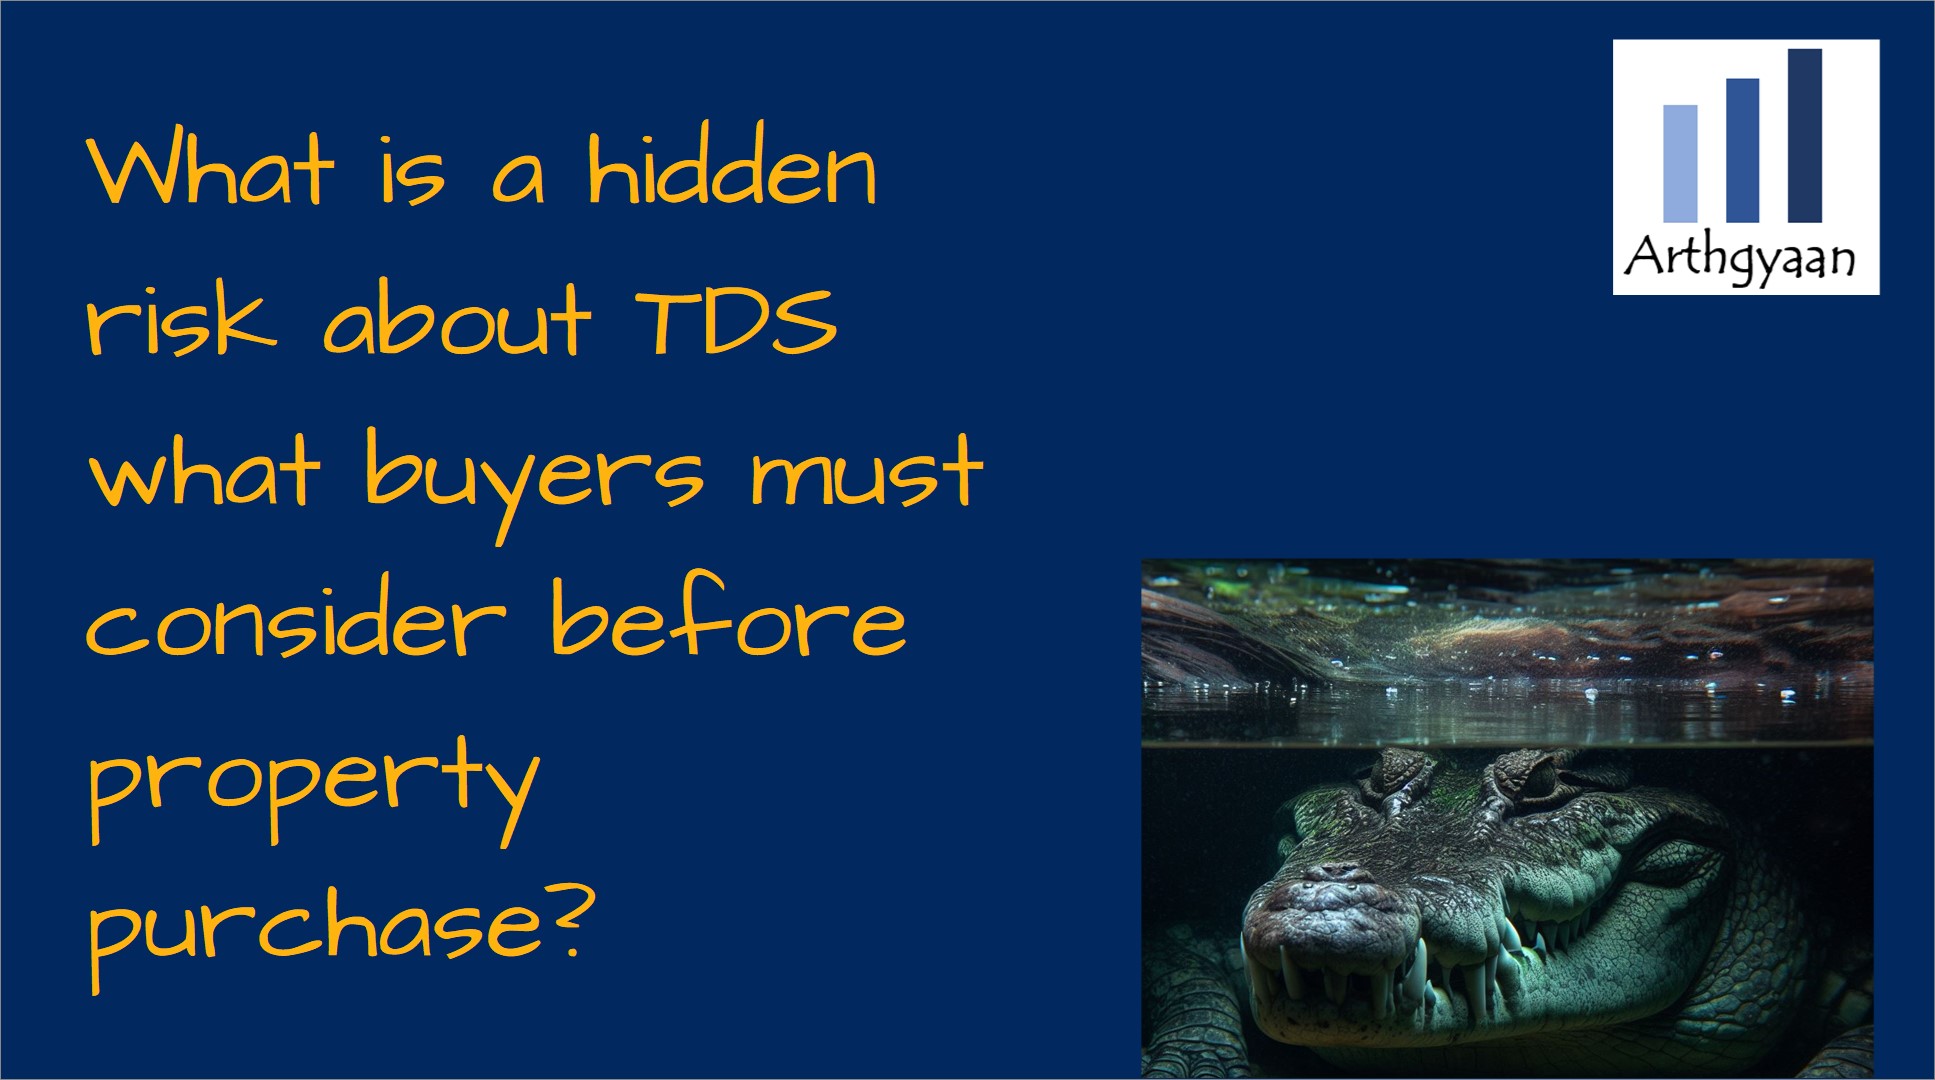 What is a hidden risk about TDS what buyers must consider before property purchase?